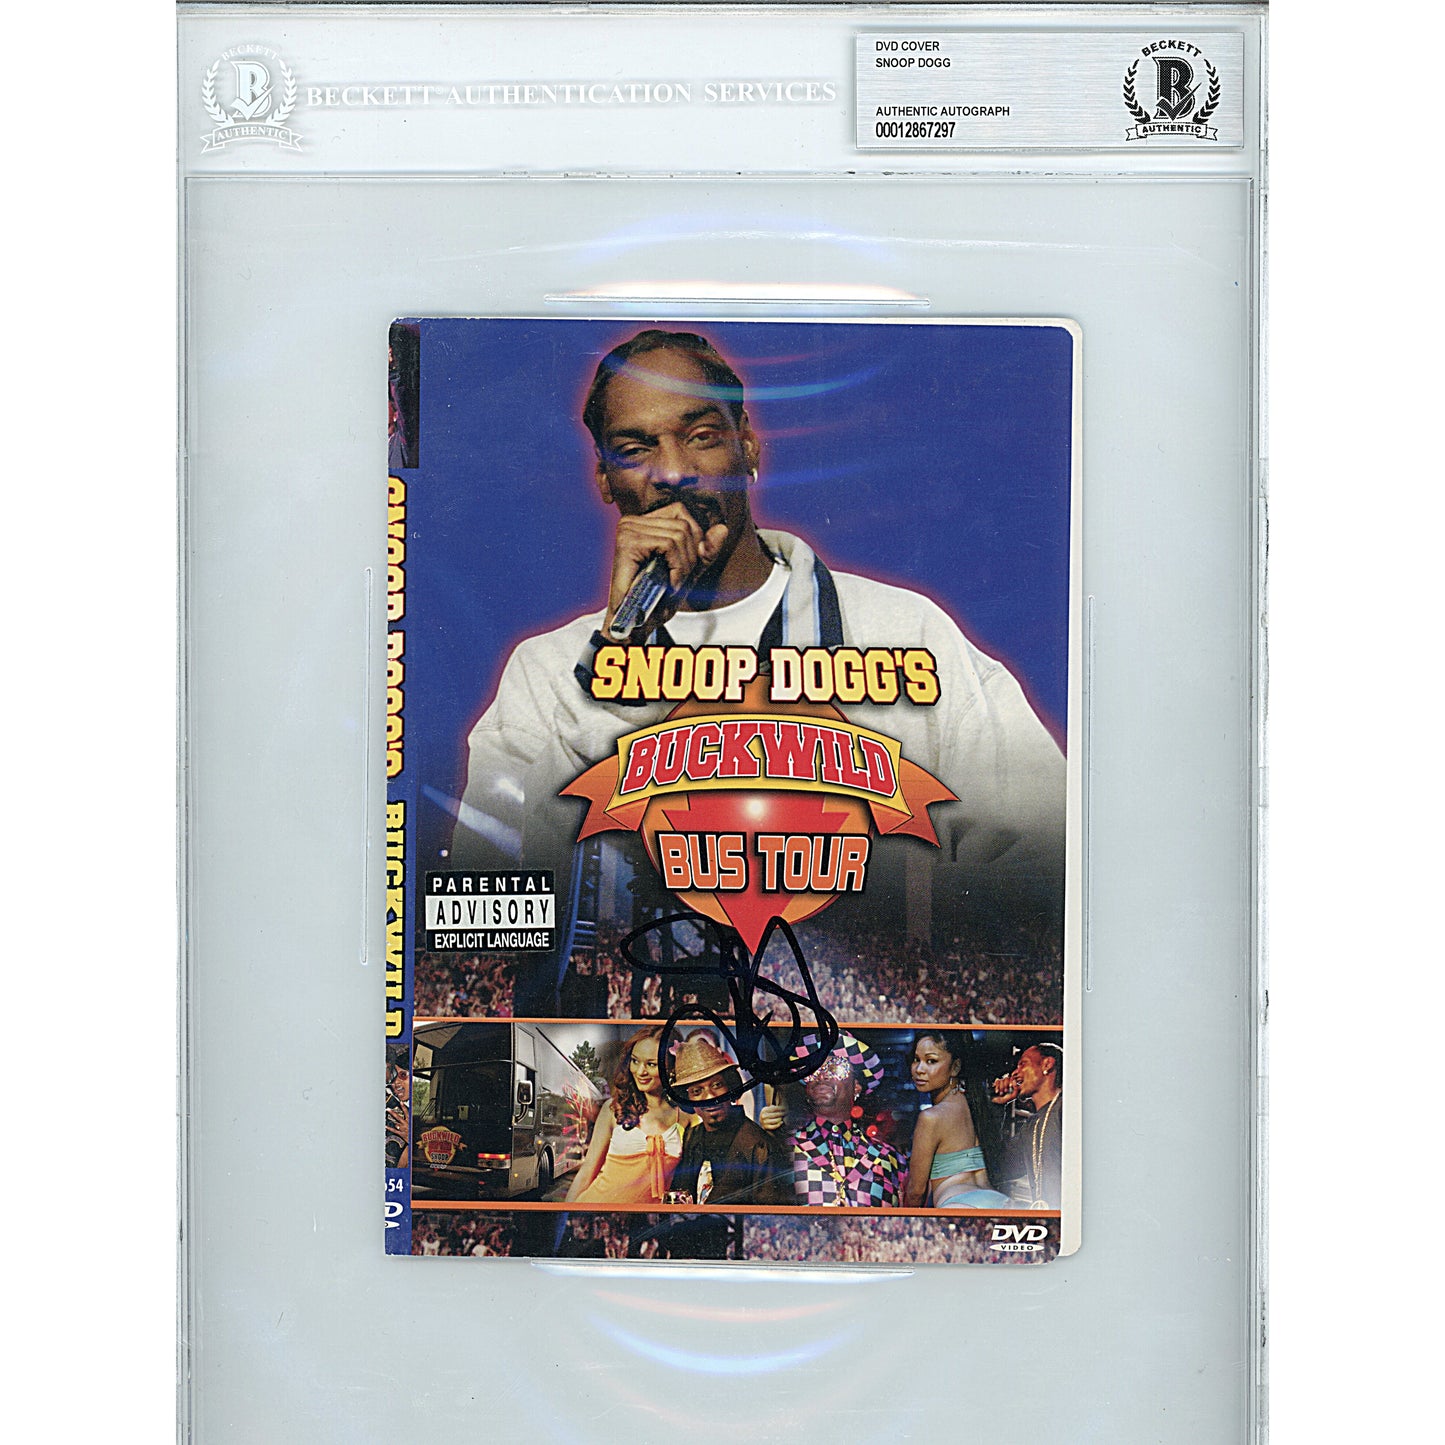 Music- Autographed- Snoop Dogg Signed Buckwild Bus Tour DVD Cover Beckett BAS Authenticated Encapsulated Slabbed 00012867297 - 101